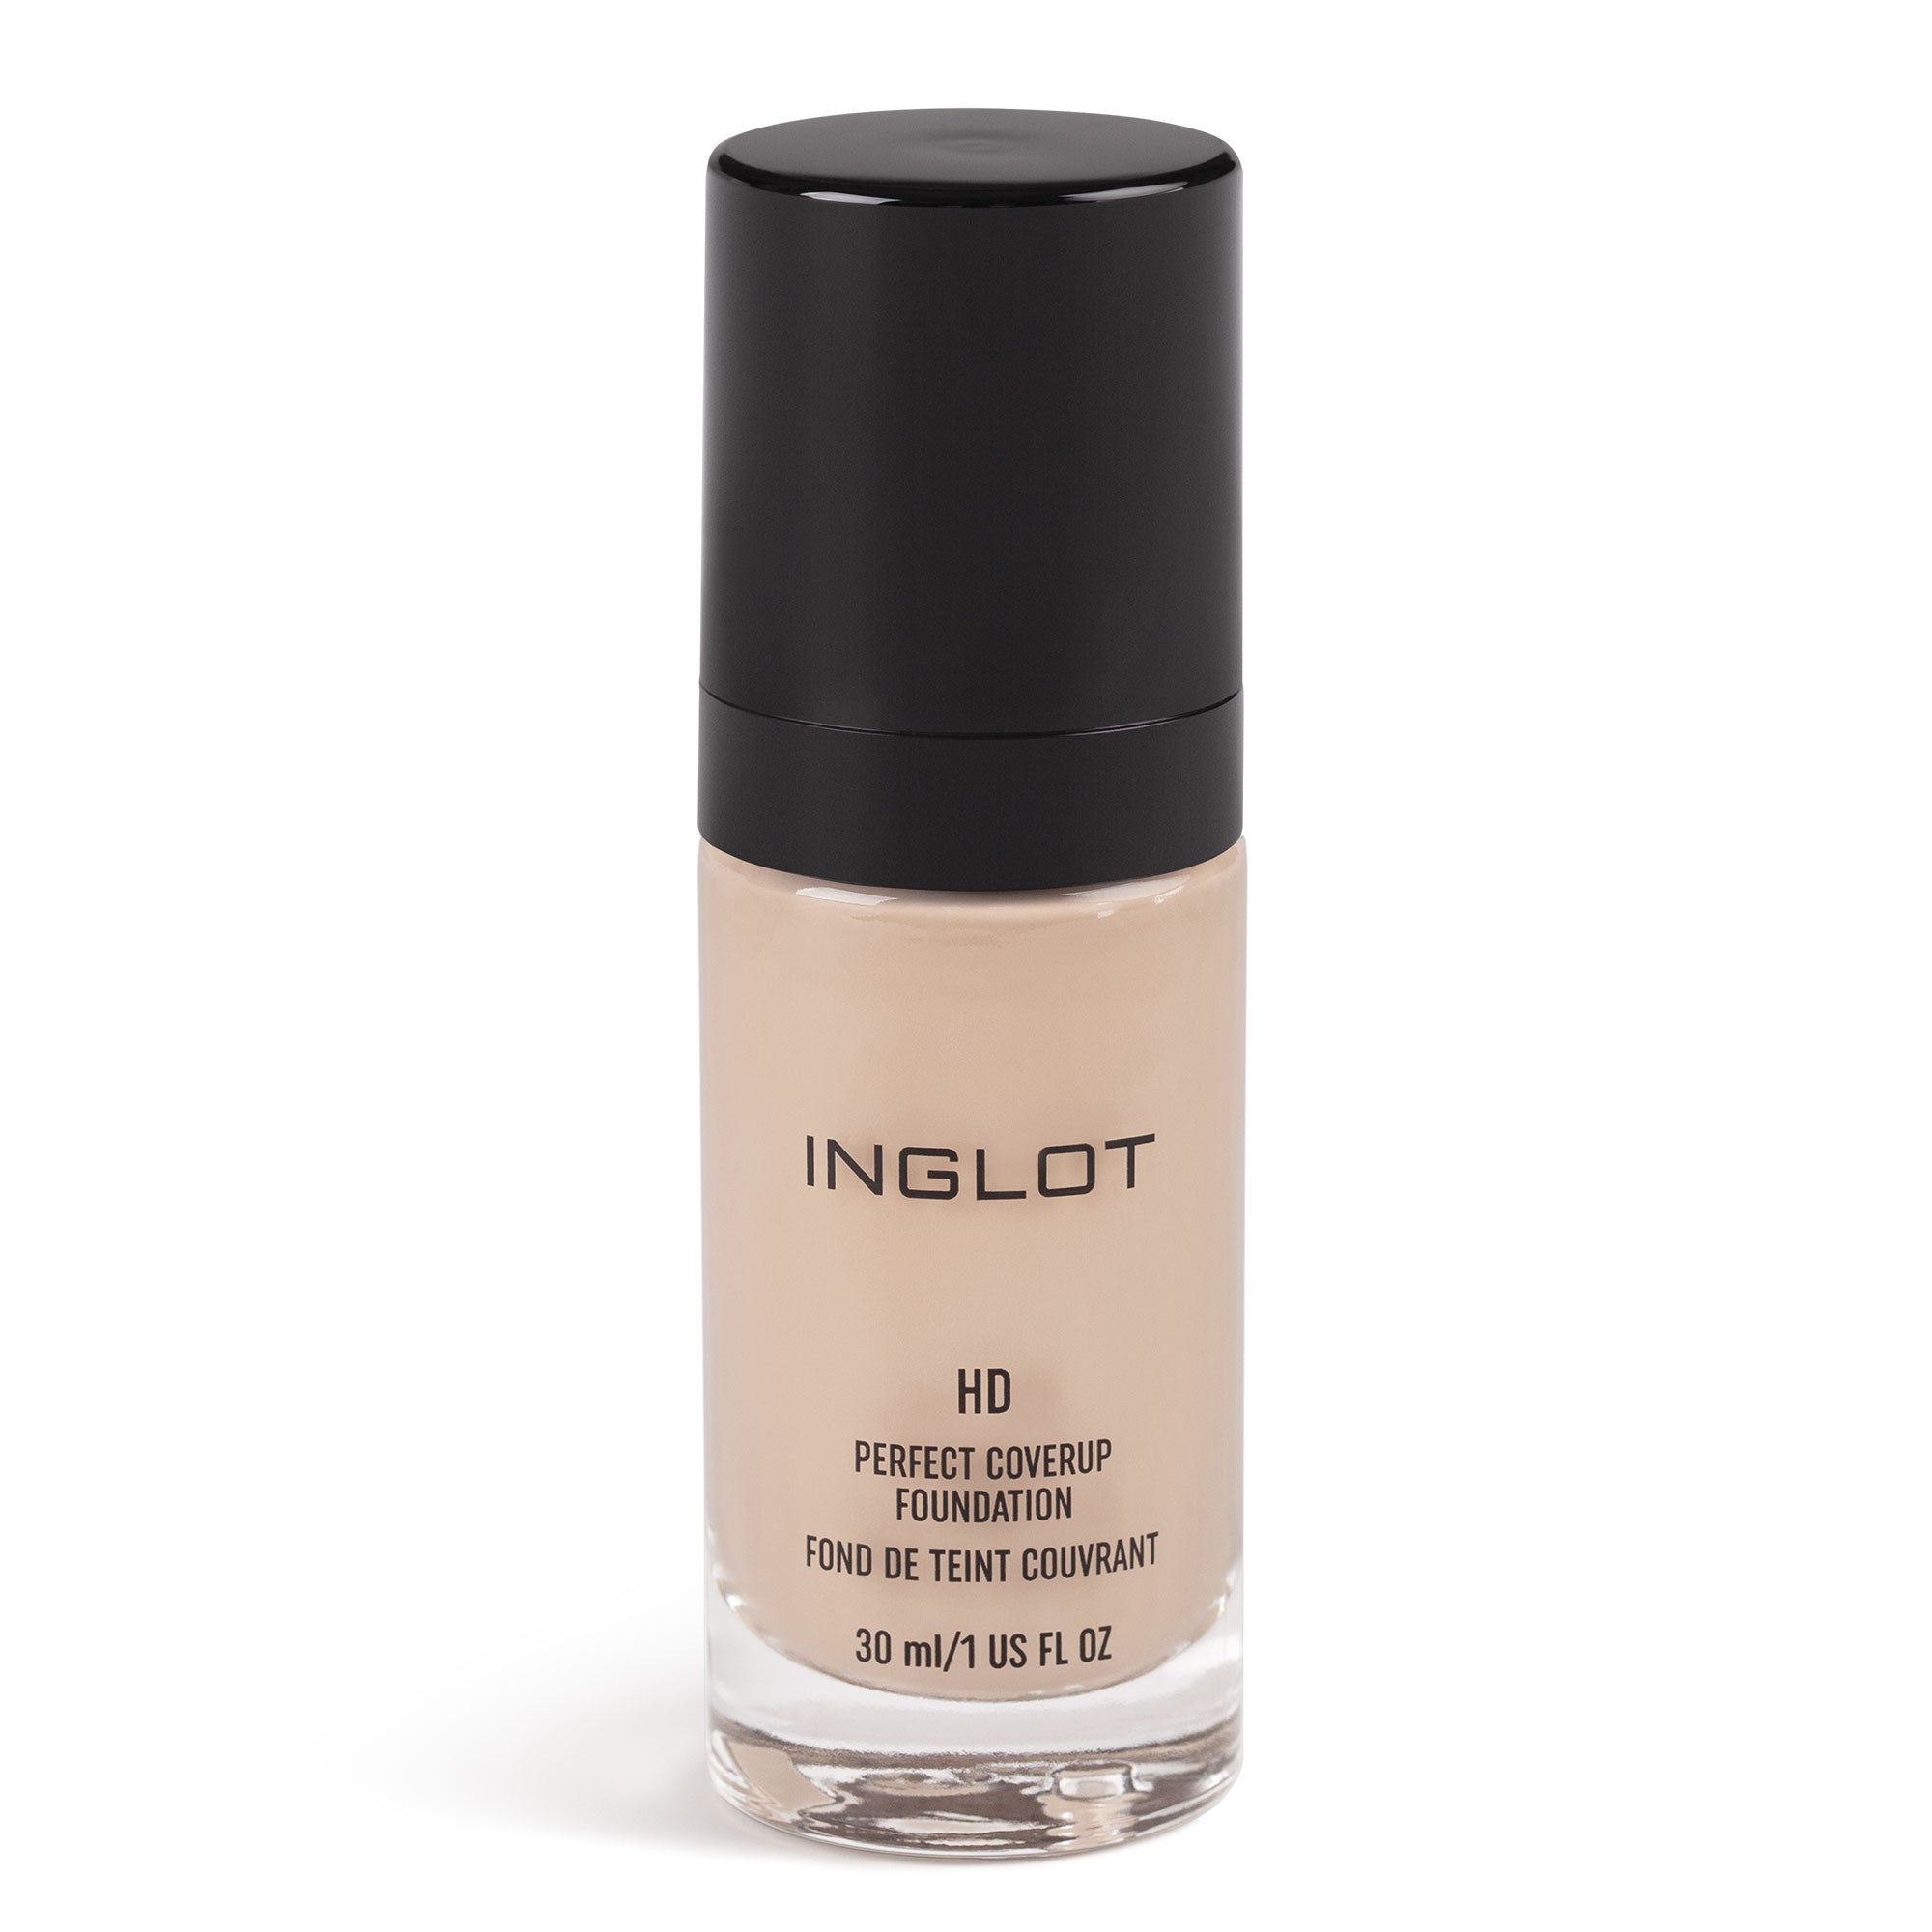 HD Perfect Coverup Foundation 79 - Inglot Cosmetics